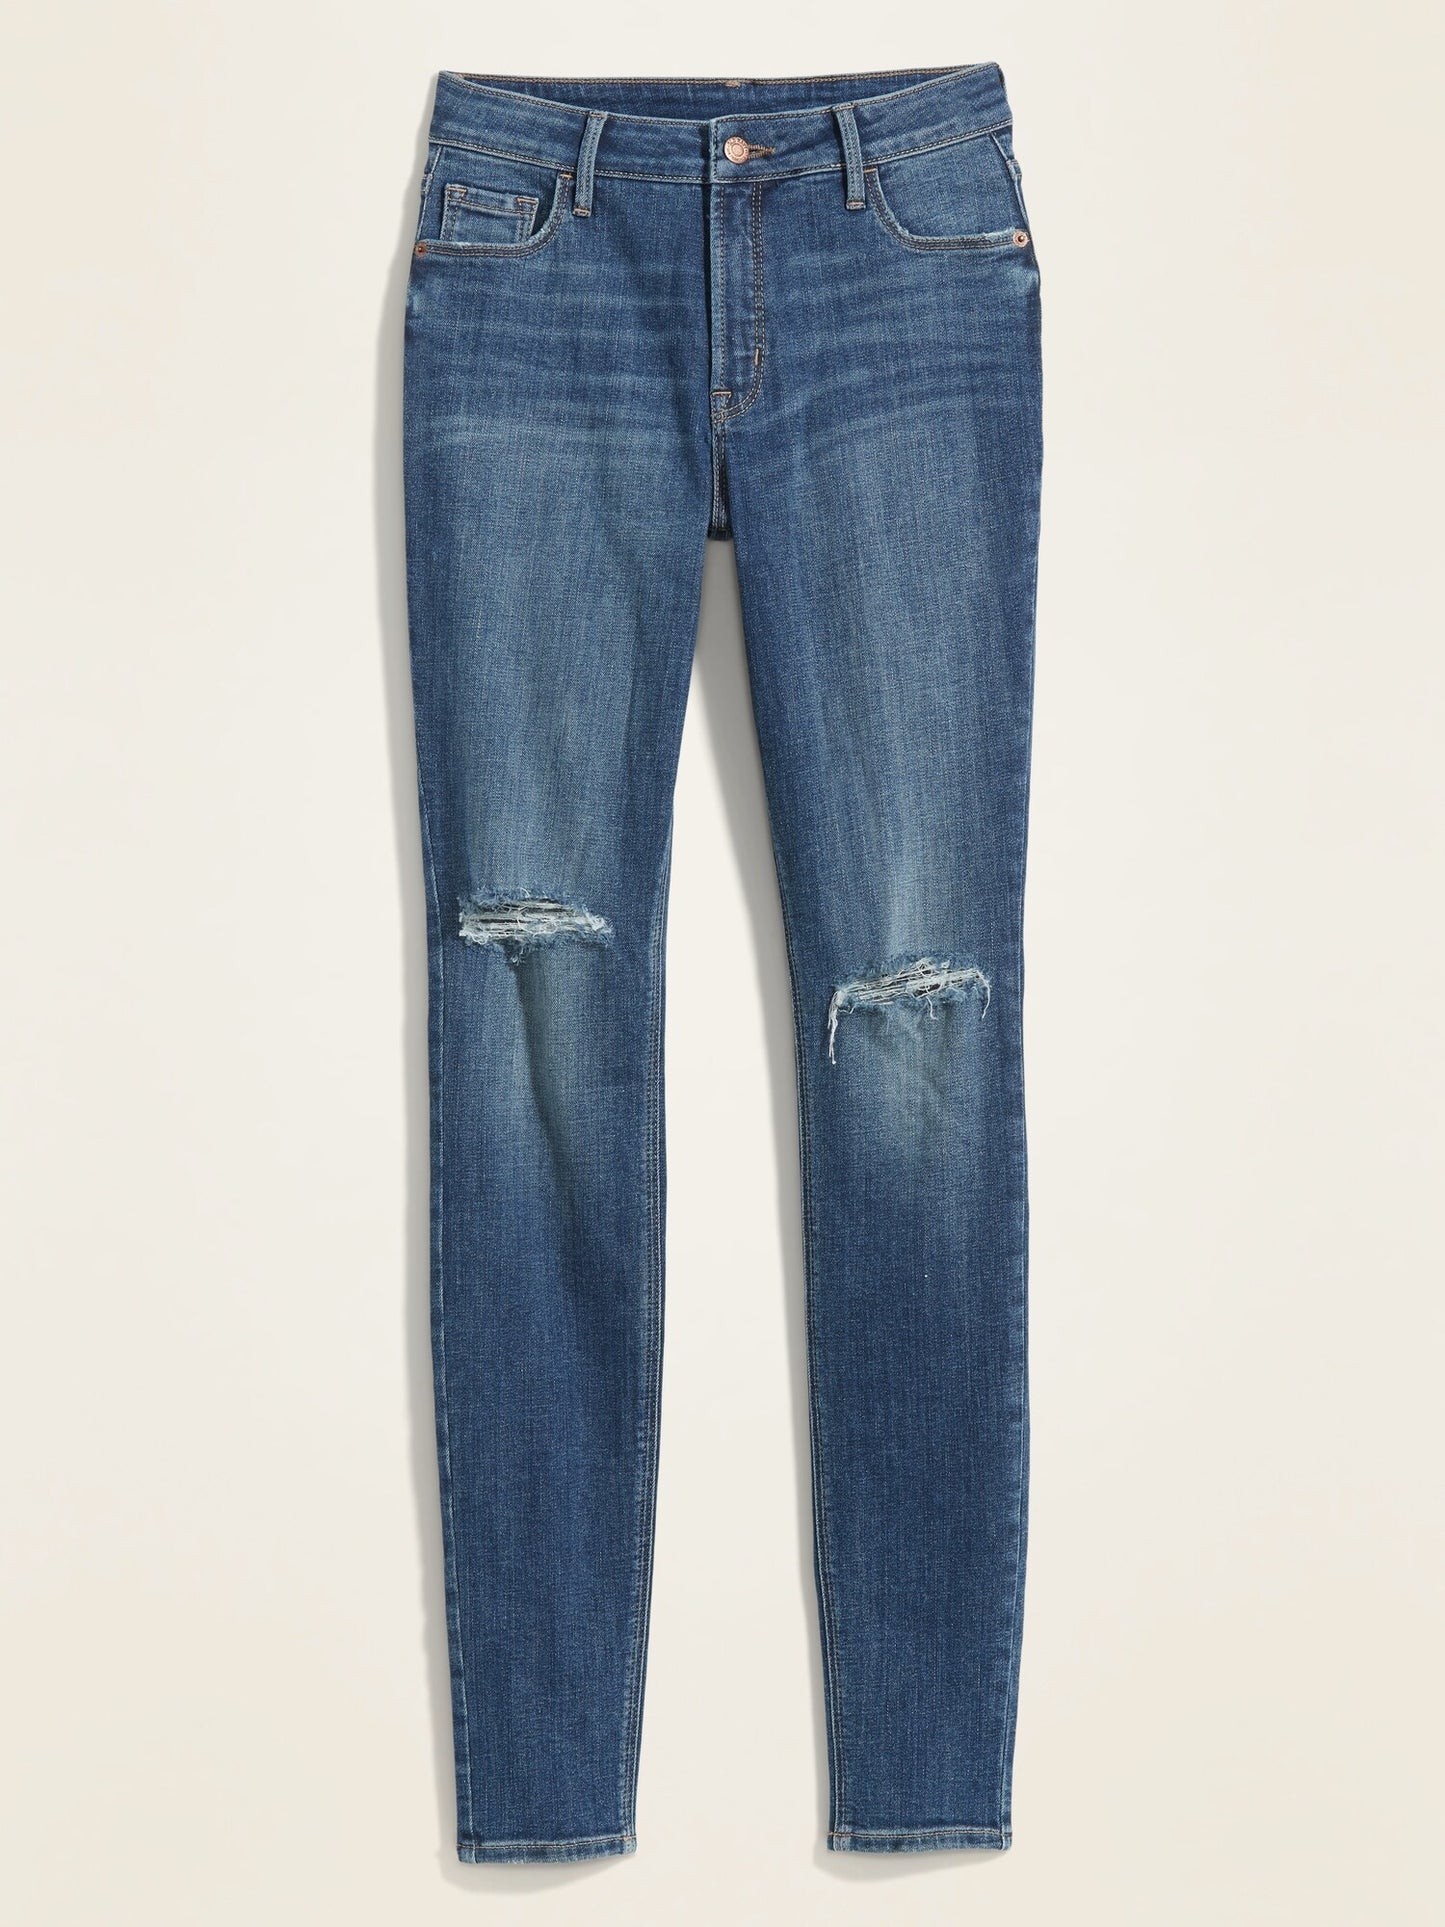 ON High-Waisted Rockstar Super Skinny Ripped Jeans For Women - Sadie